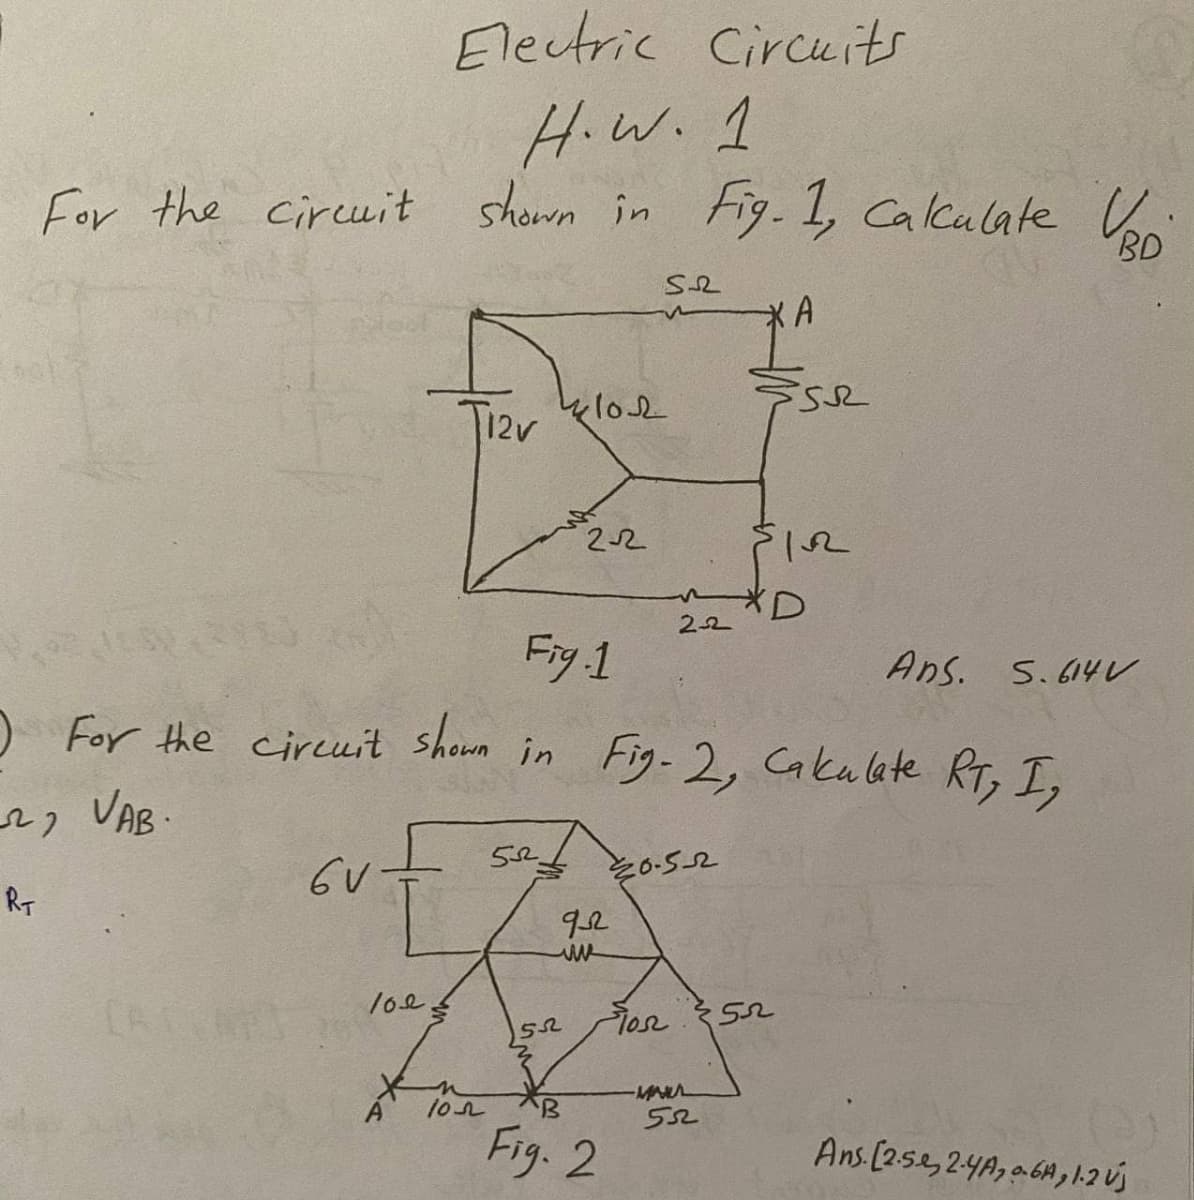 Electric Circuits
H.W.1
For the circuit shown in Fig-1, Calculate Co
BD
12v klo2
22
Fig 1
O For the ciruit shown in Fig-2, Cakulate RT, I,
Ans. S.614 V
, VAB-
そo-5-2
RT
92
CA
102
Fig. 2
Ans [25.e,24A, a6A,1.2 Új
